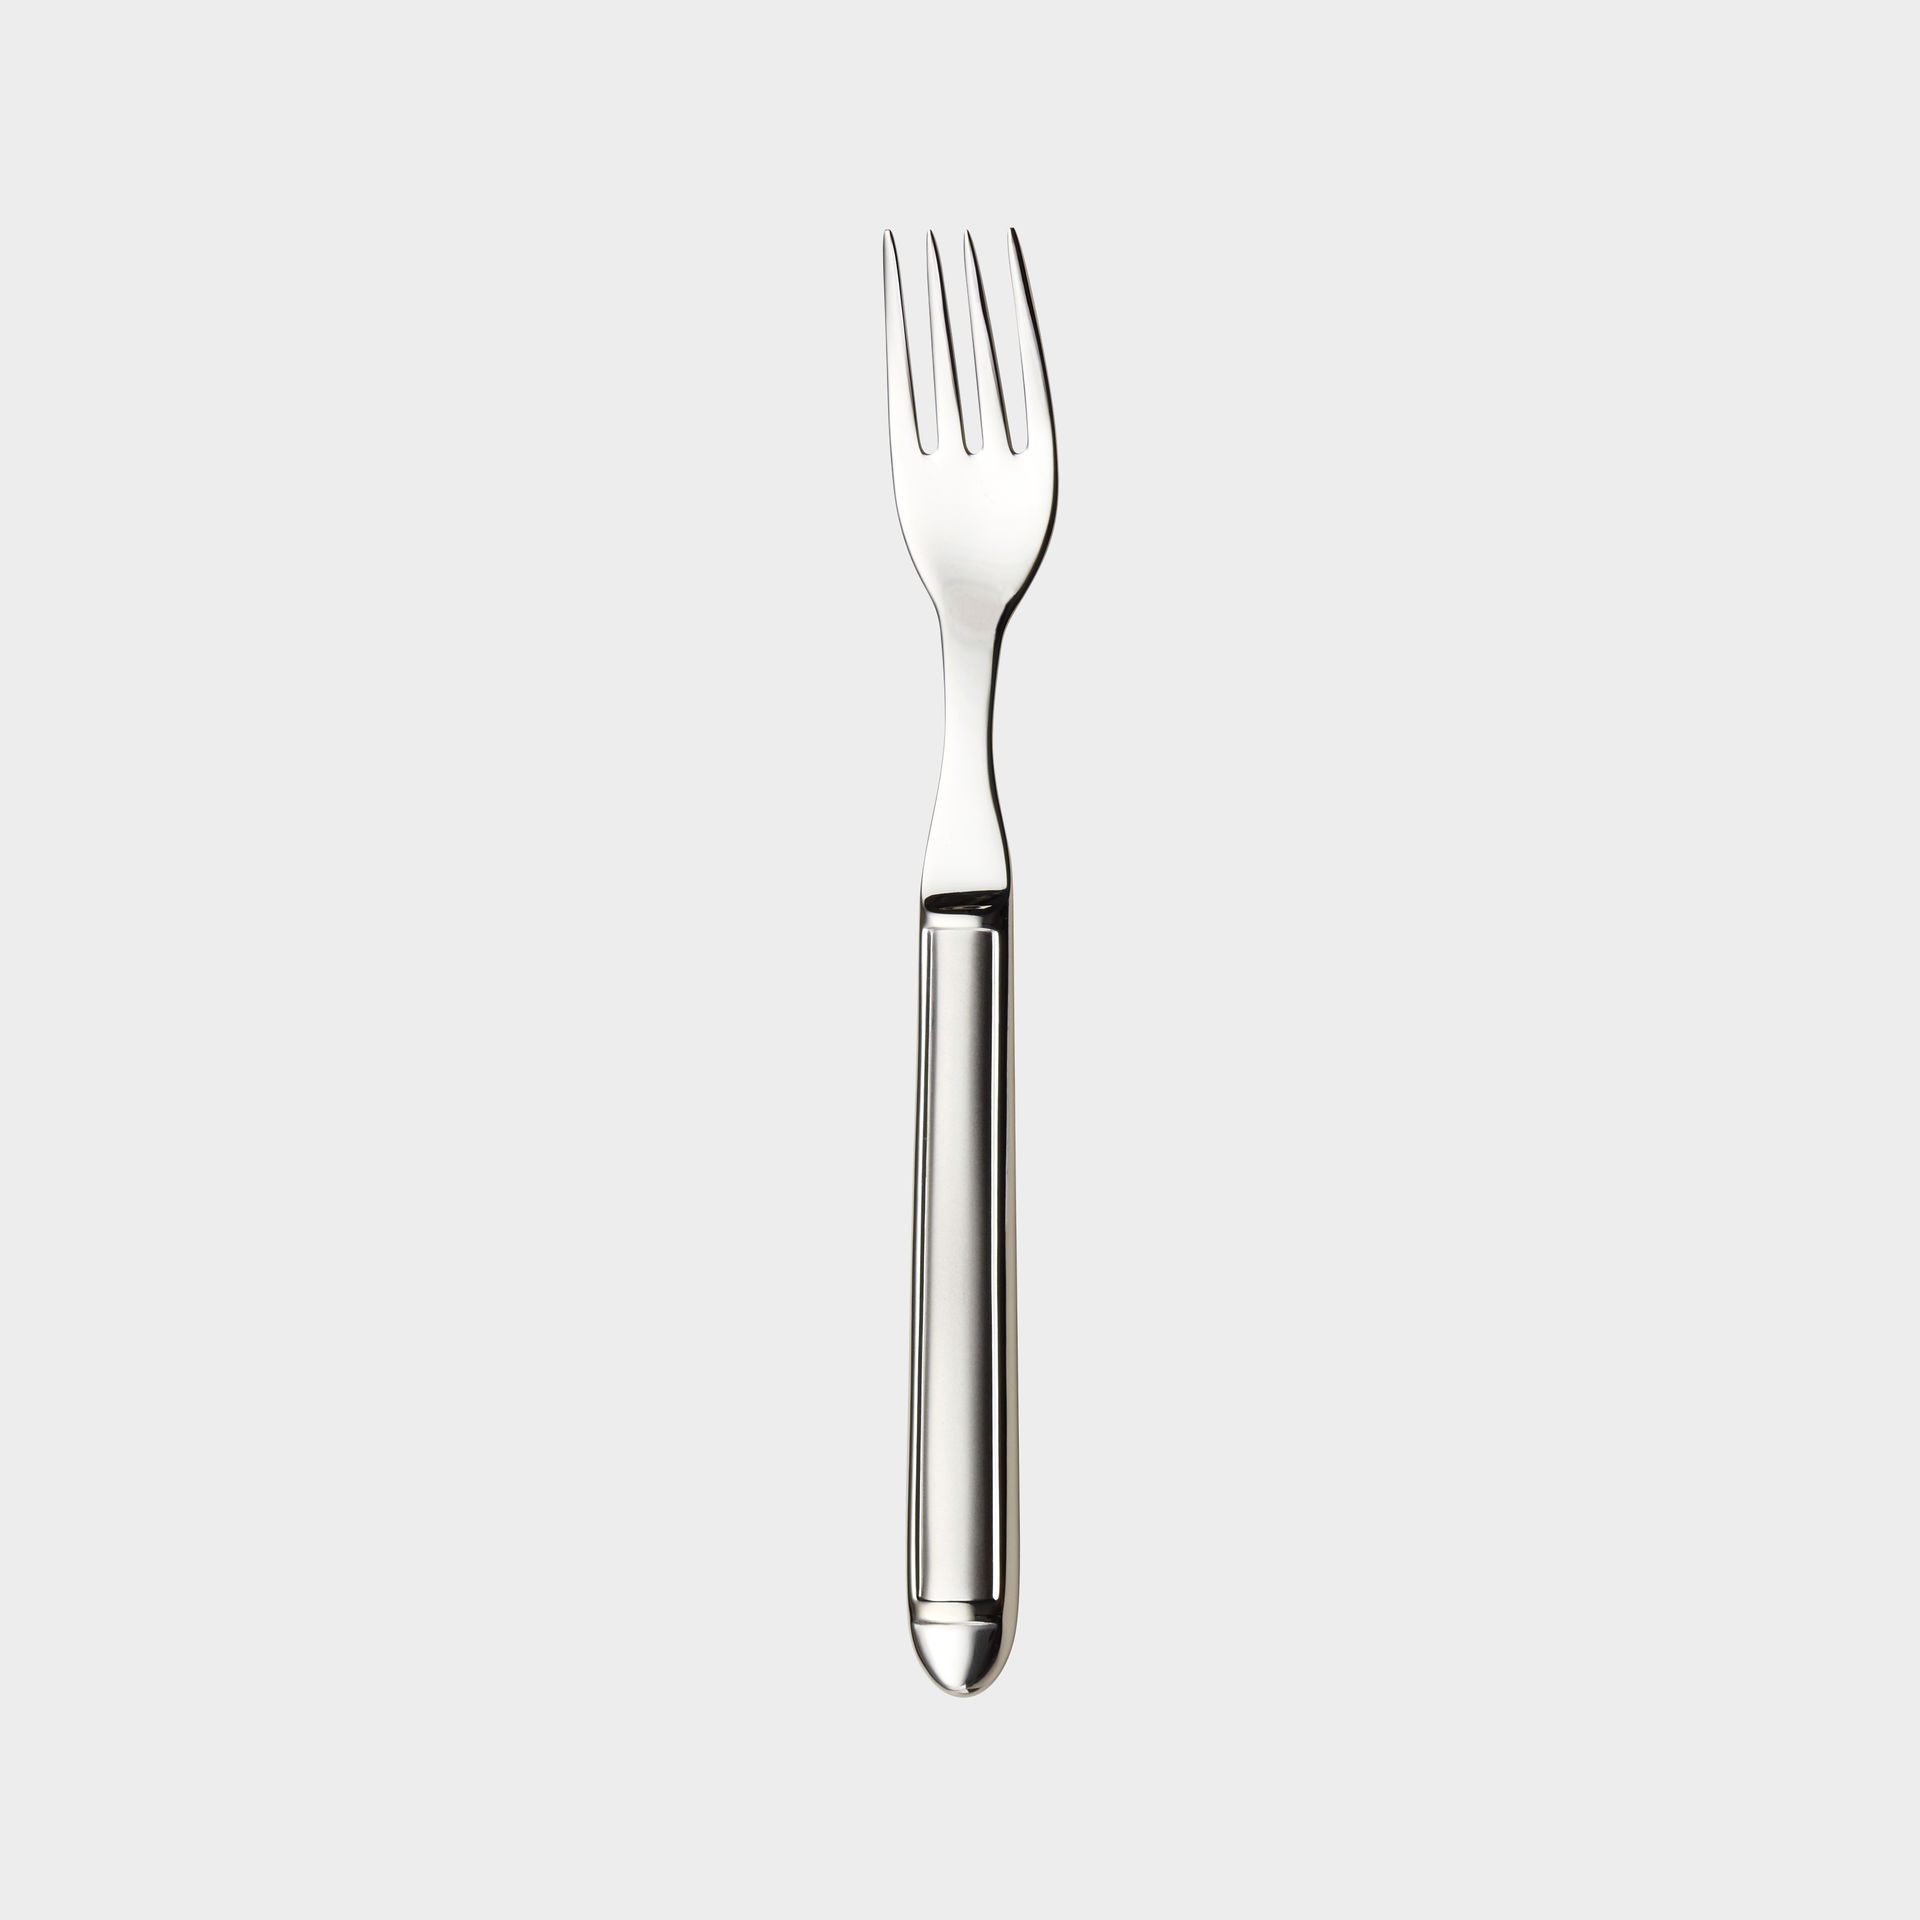 Nora appetizer fork product image